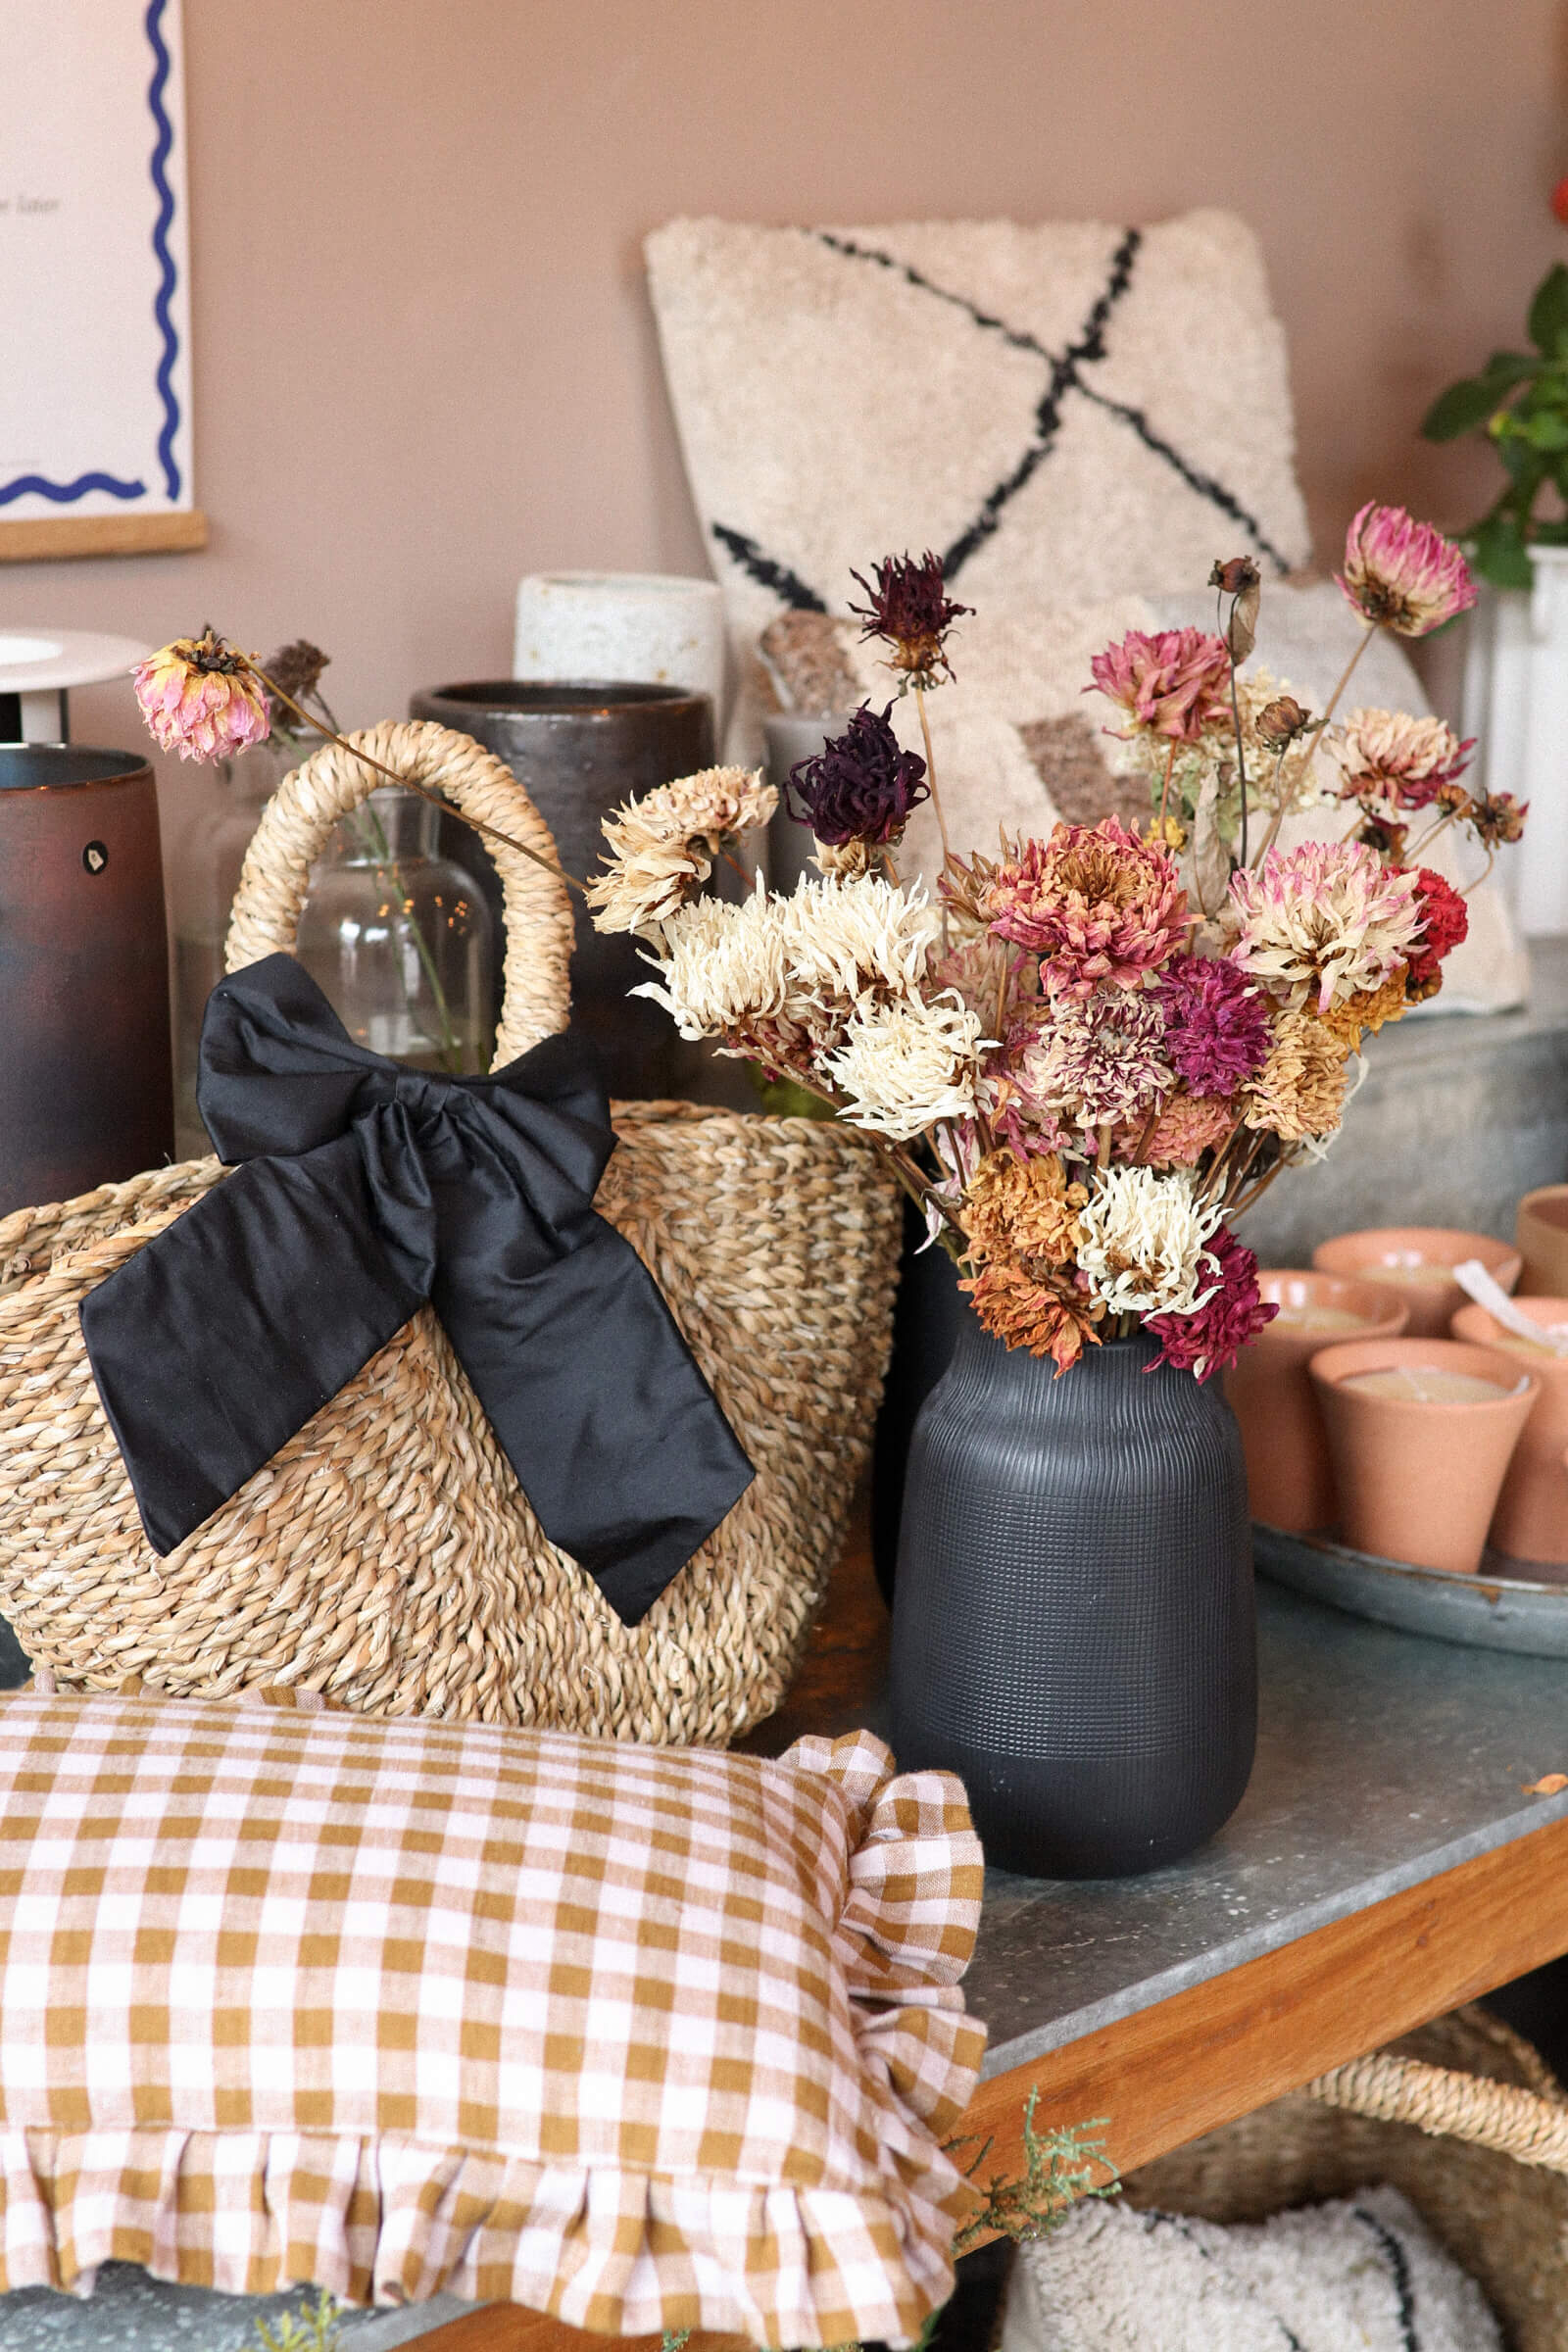 Bohemian interiors and homeware including gingham cushion, dried flowers and wicker bag inside independent flower shop Hedge, Birmingham